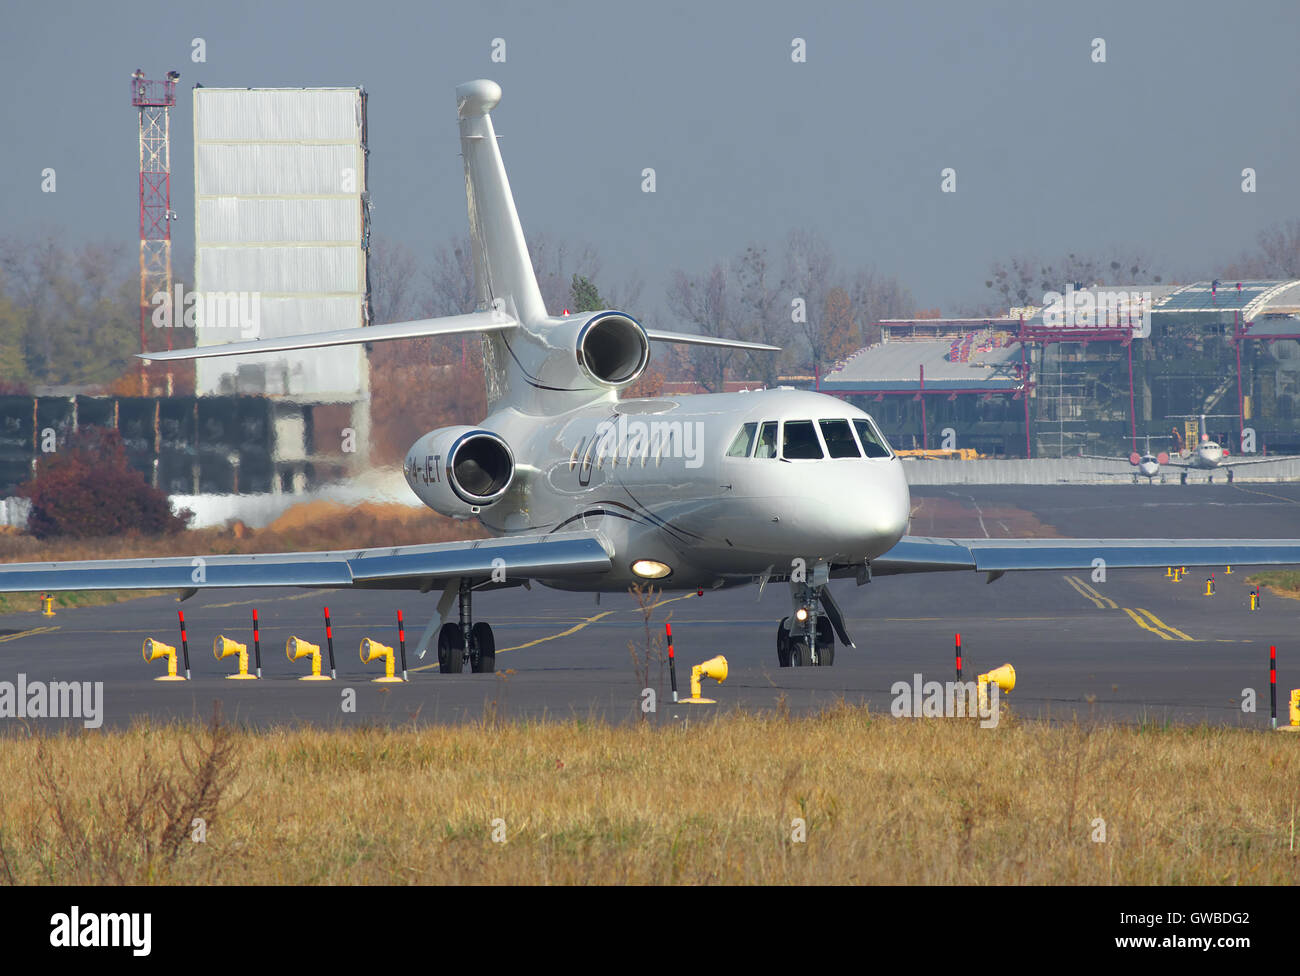 Kiev, Ukraine - November 5, 2011: Dassault Falcon 50EX business jet is taxiing to the runway in the airport Stock Photo